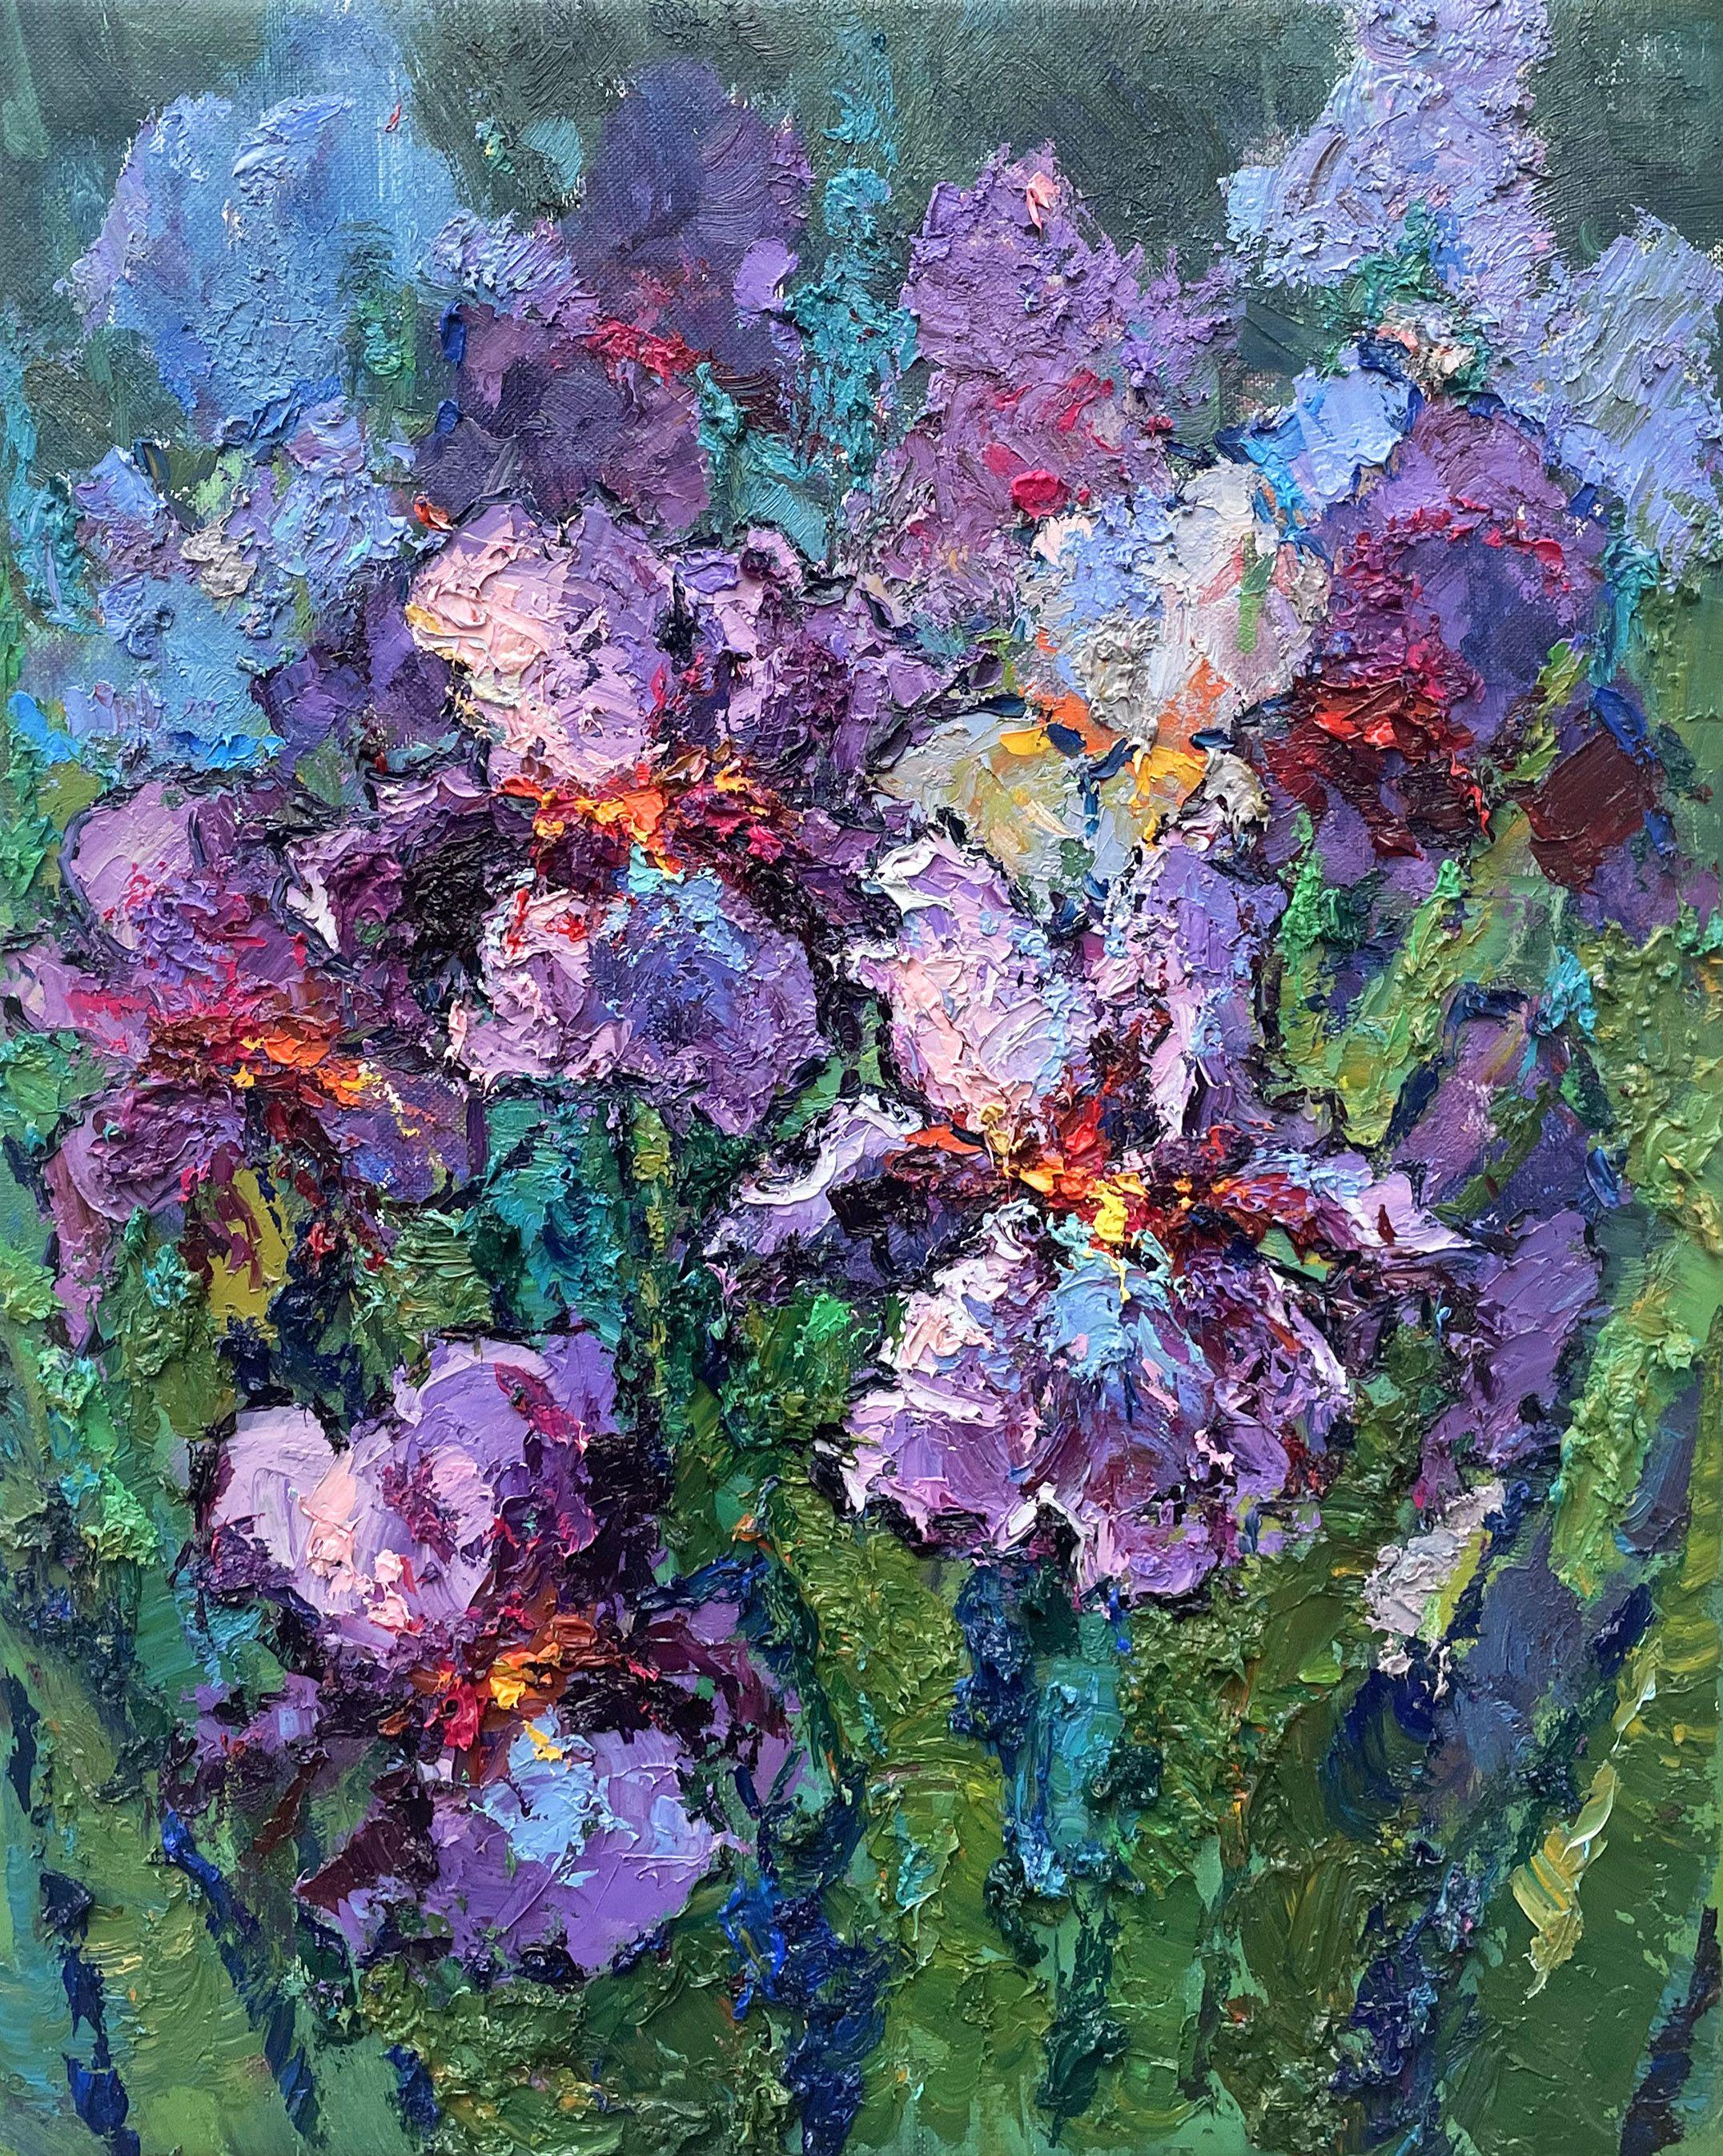 Original Oil painting by Ukrainian artist Evgeny Chernyakovsky      "irises  "  60.0 X 50.0 CM / 23.6 X 19.6 IN  HIGH QUALITY oil on panel  Signed on the front and back  Dated 2023  Good condition  GUARANTEE OF AUTHENTICITY :: Painting ::